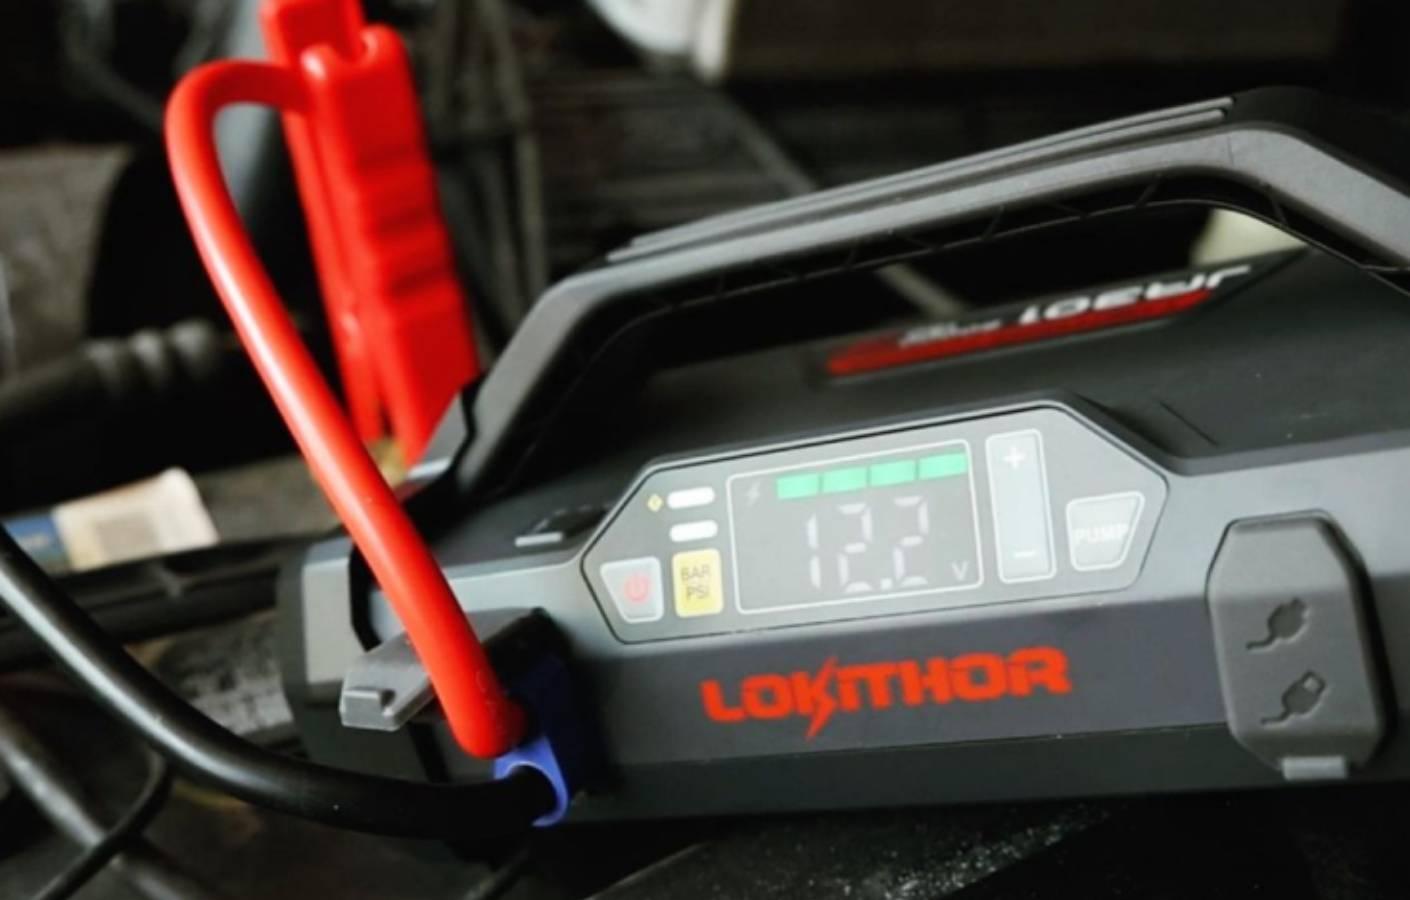 2000A Lithium Jump Starter with Air Compressor- ja301 review - Lokithorshop